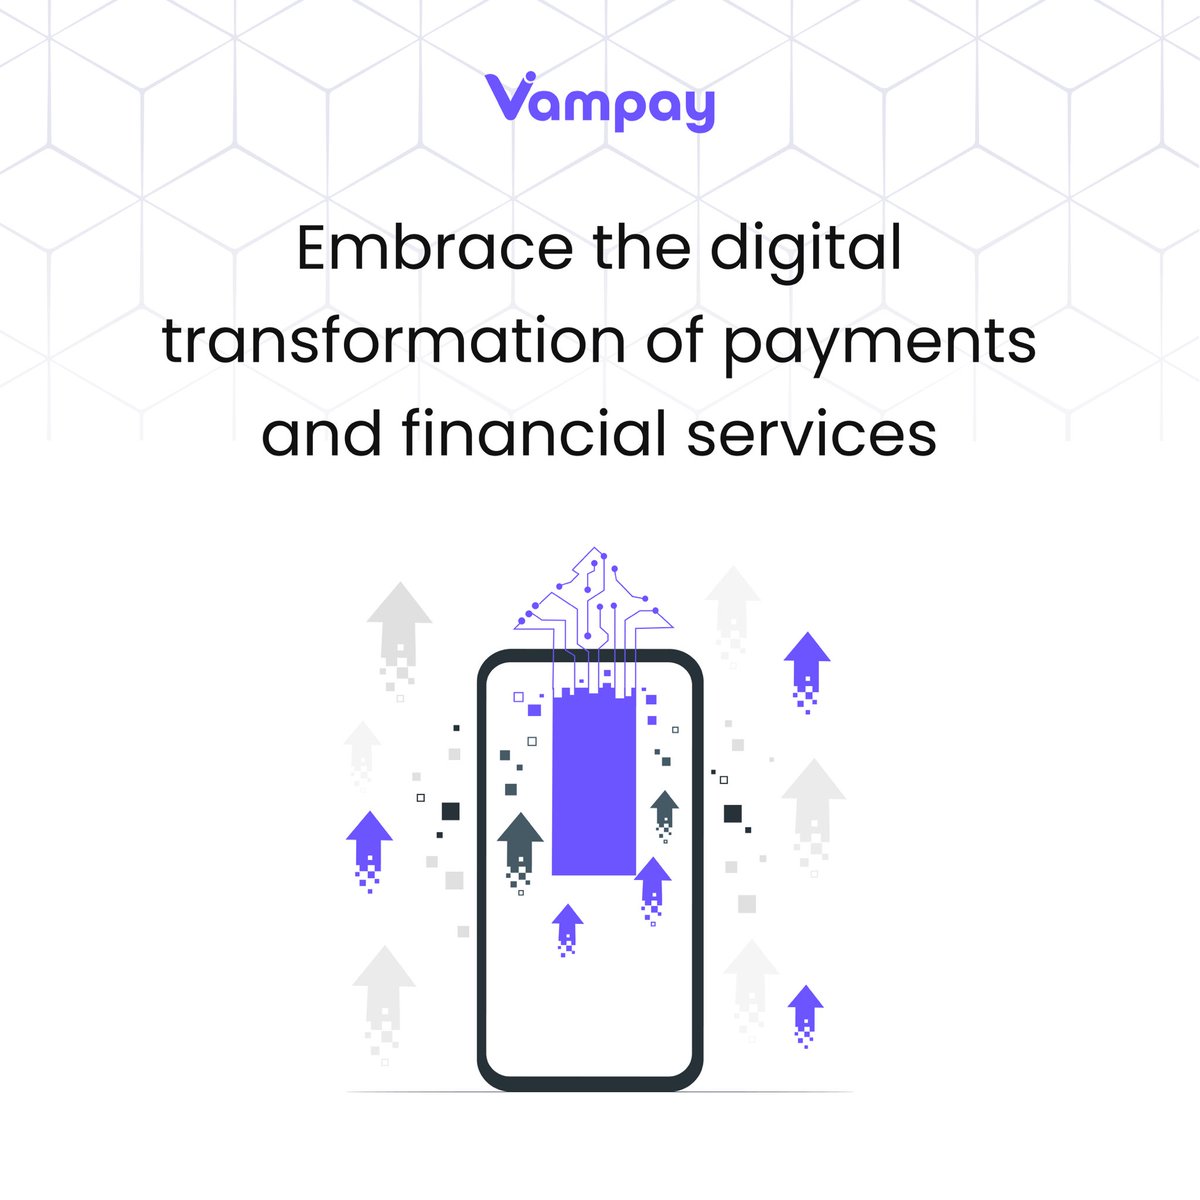 Embrace the digital transformation of payments and financial services with Vampay as your trusted partner in fintech excellence. Explore the Transformation at vampay.in

#fintech #financialinnovation #vampay #upi #DigitalTransformation #onlinepay #paymentsolution